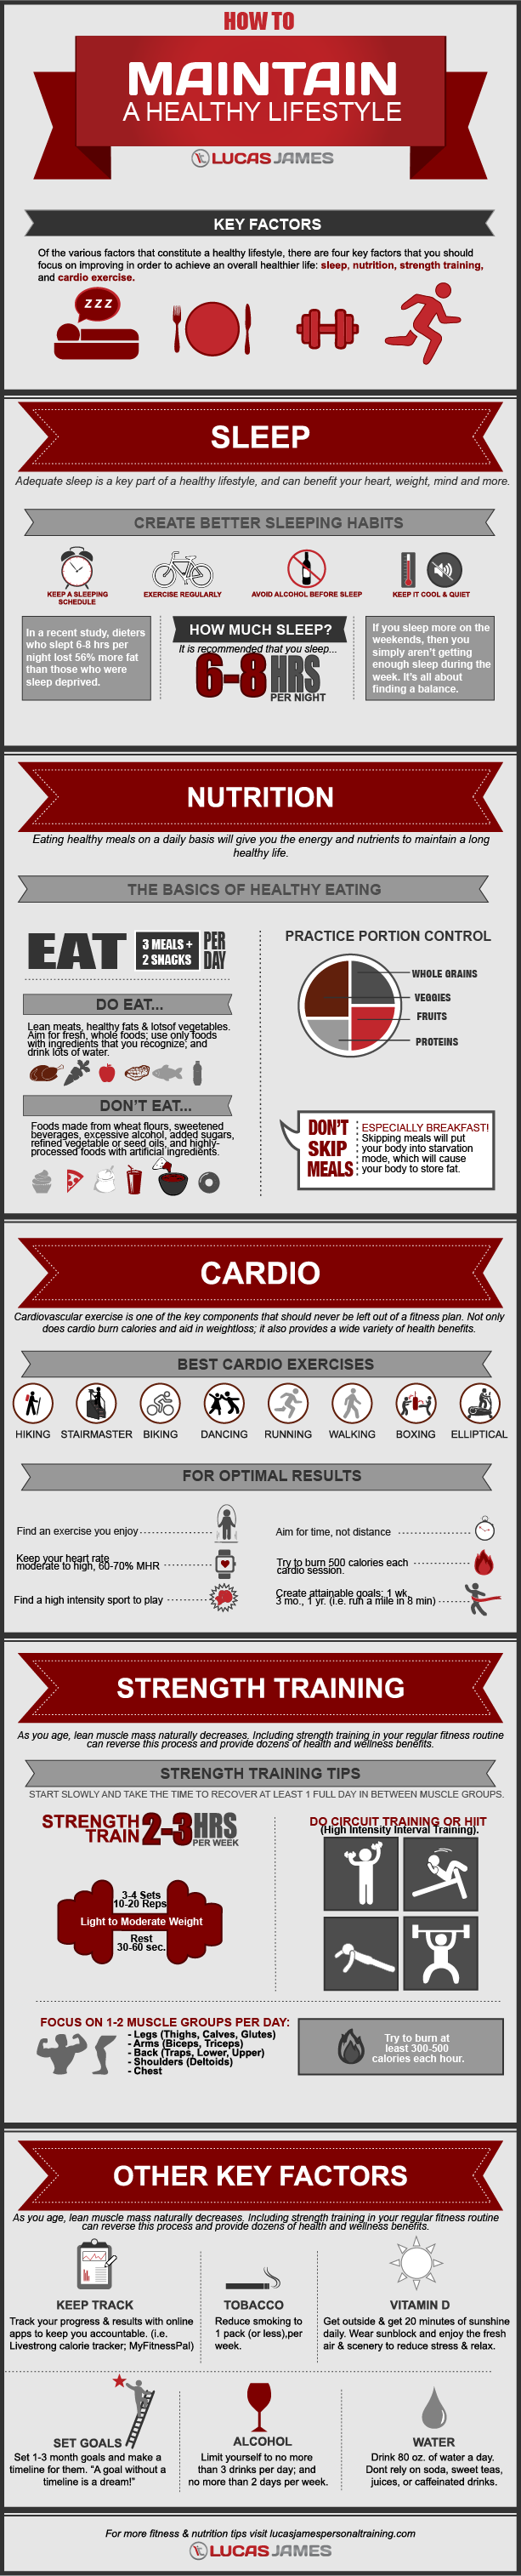 How to Maintain a Healthy Lifestyle [Infographic]